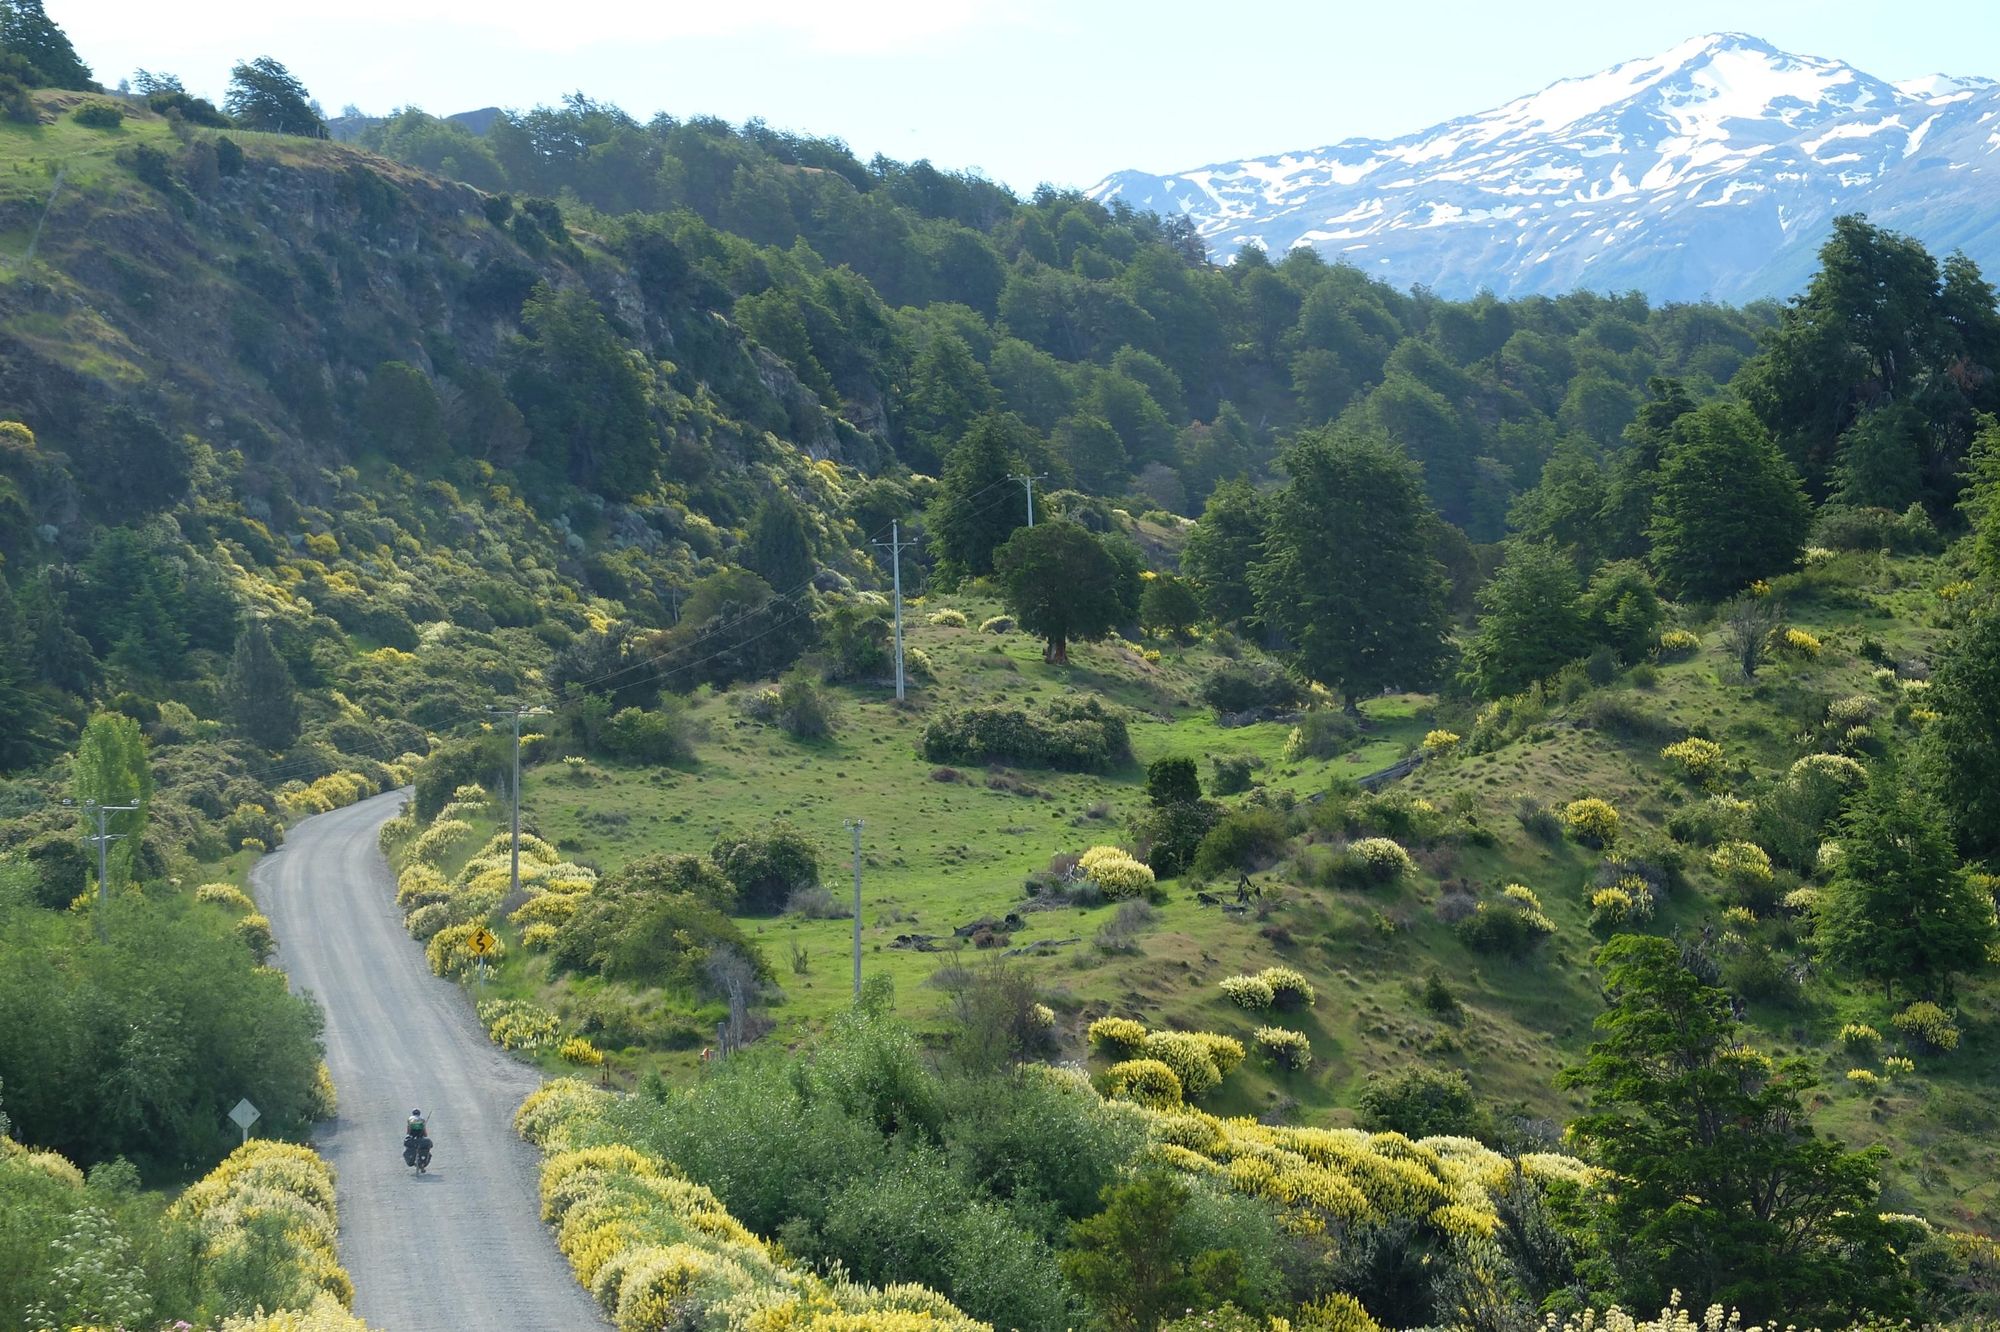 A layering landscape of lush forest and mountainous backdrops on the Carretera Austral. Photo: Adam Roberts